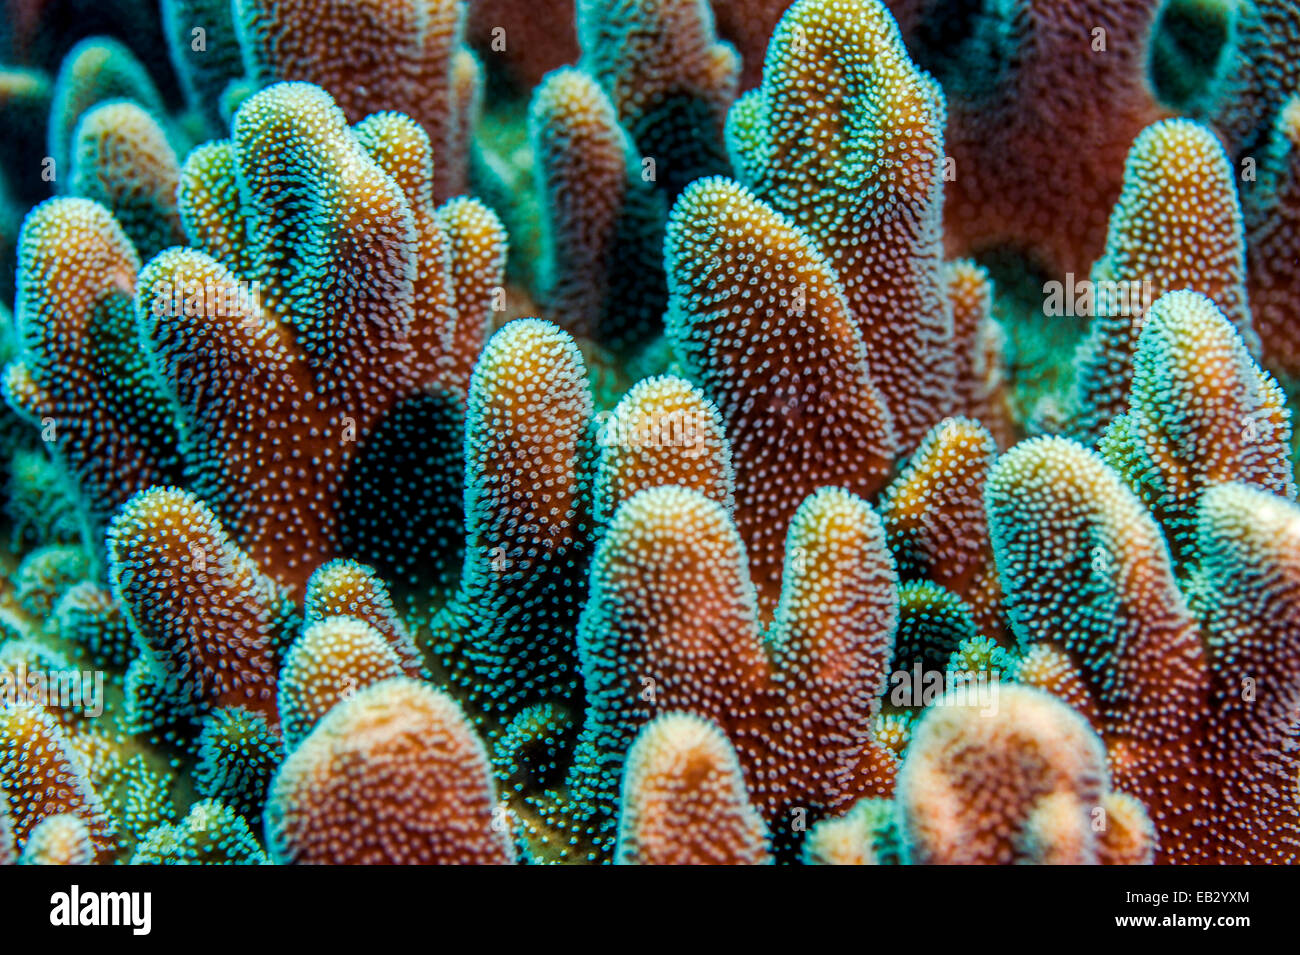 A colony of dome-like hard coral polyps feeding on a tropical reef. Stock Photo